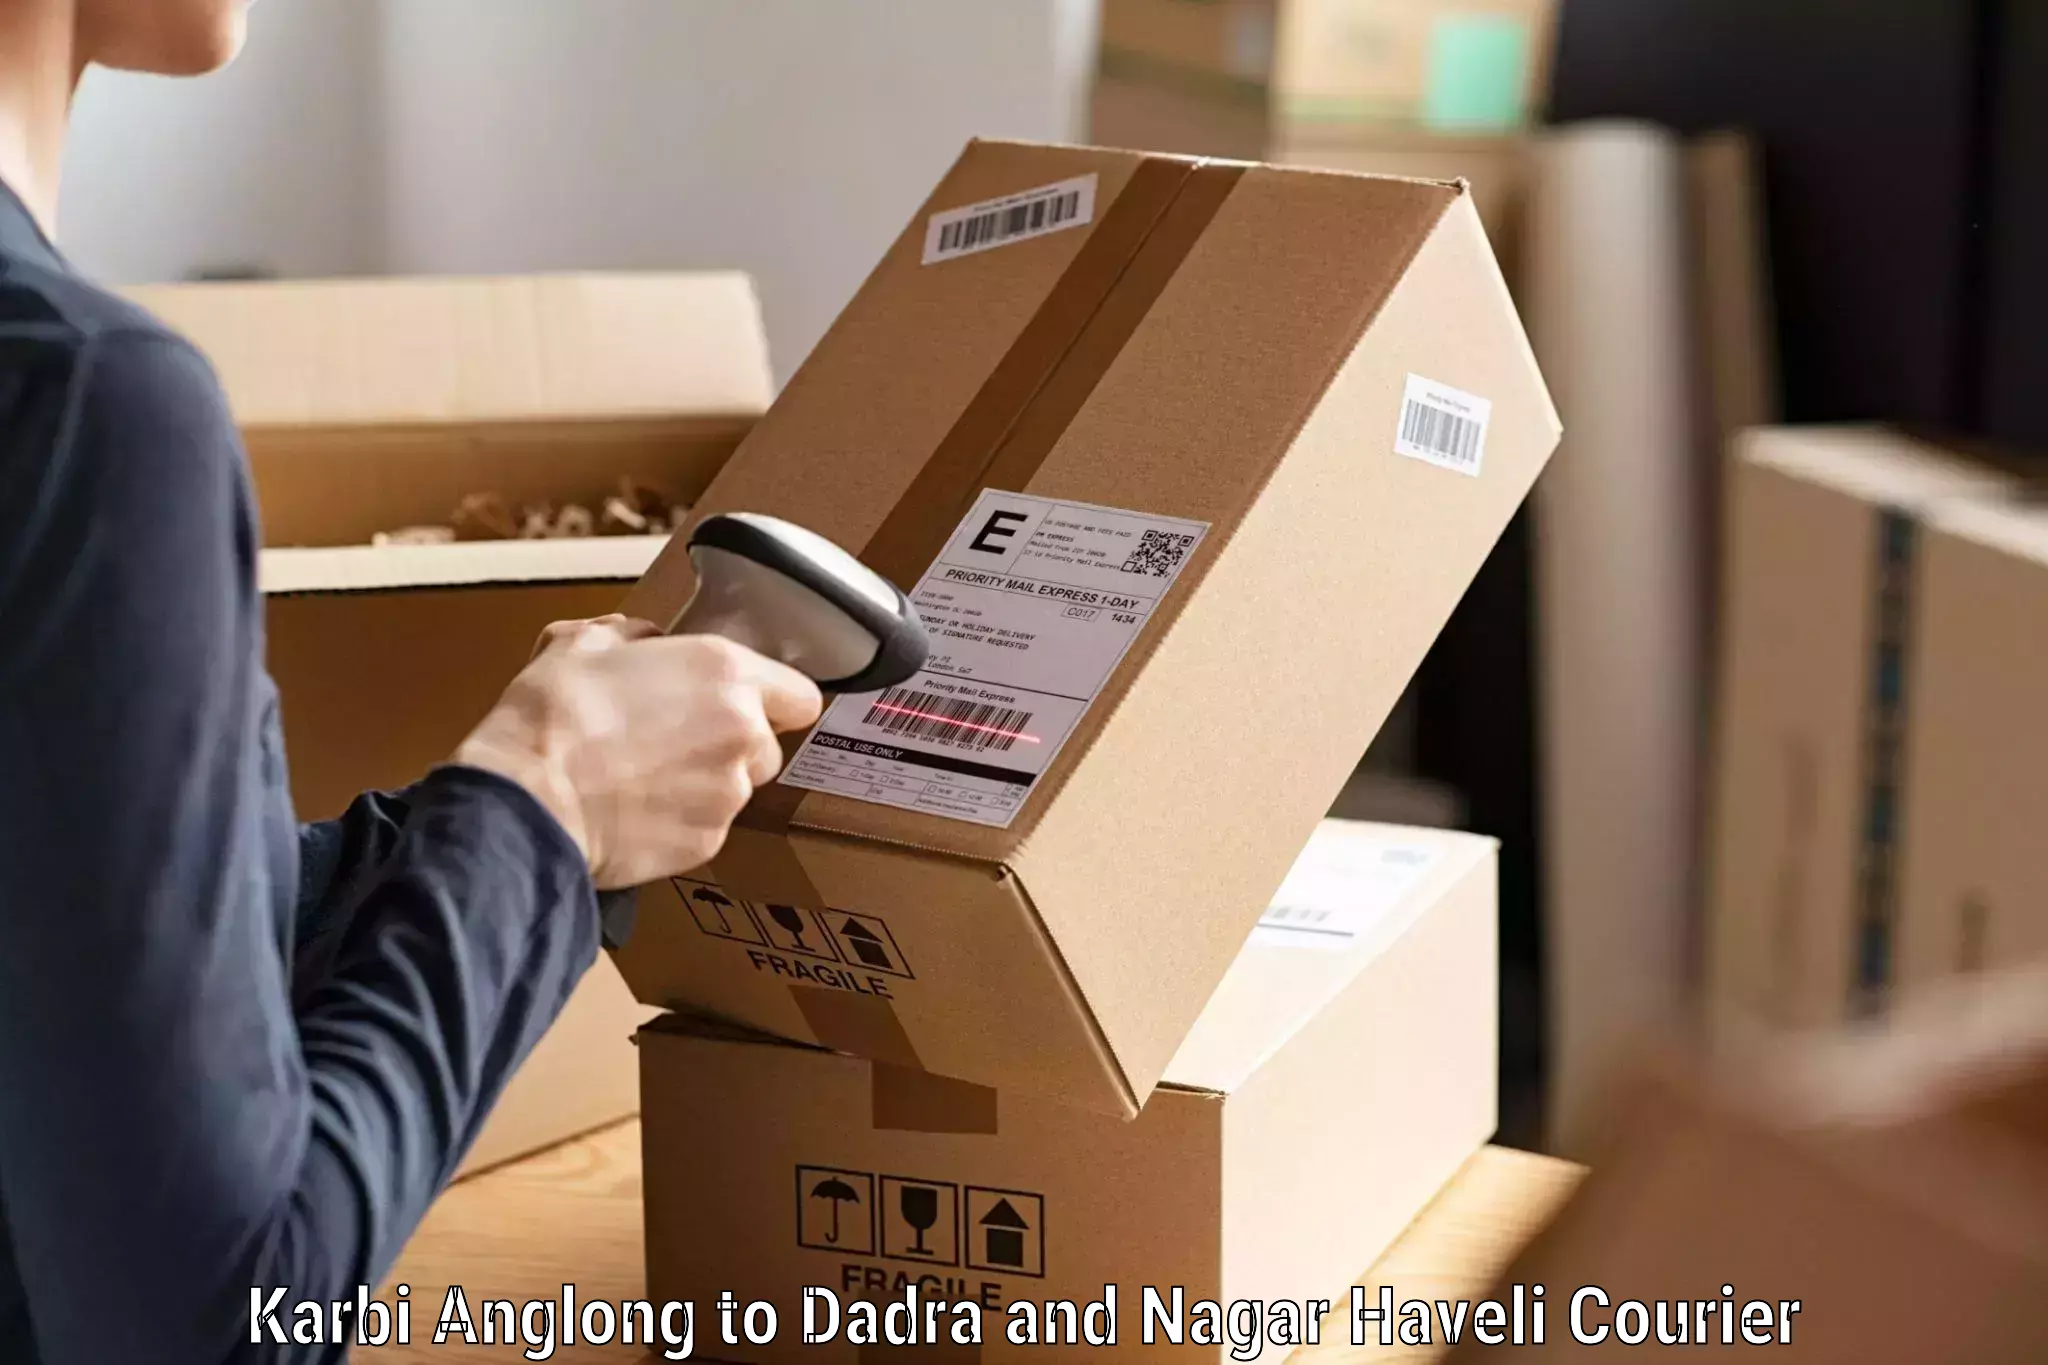 Easy access courier services Karbi Anglong to Dadra and Nagar Haveli